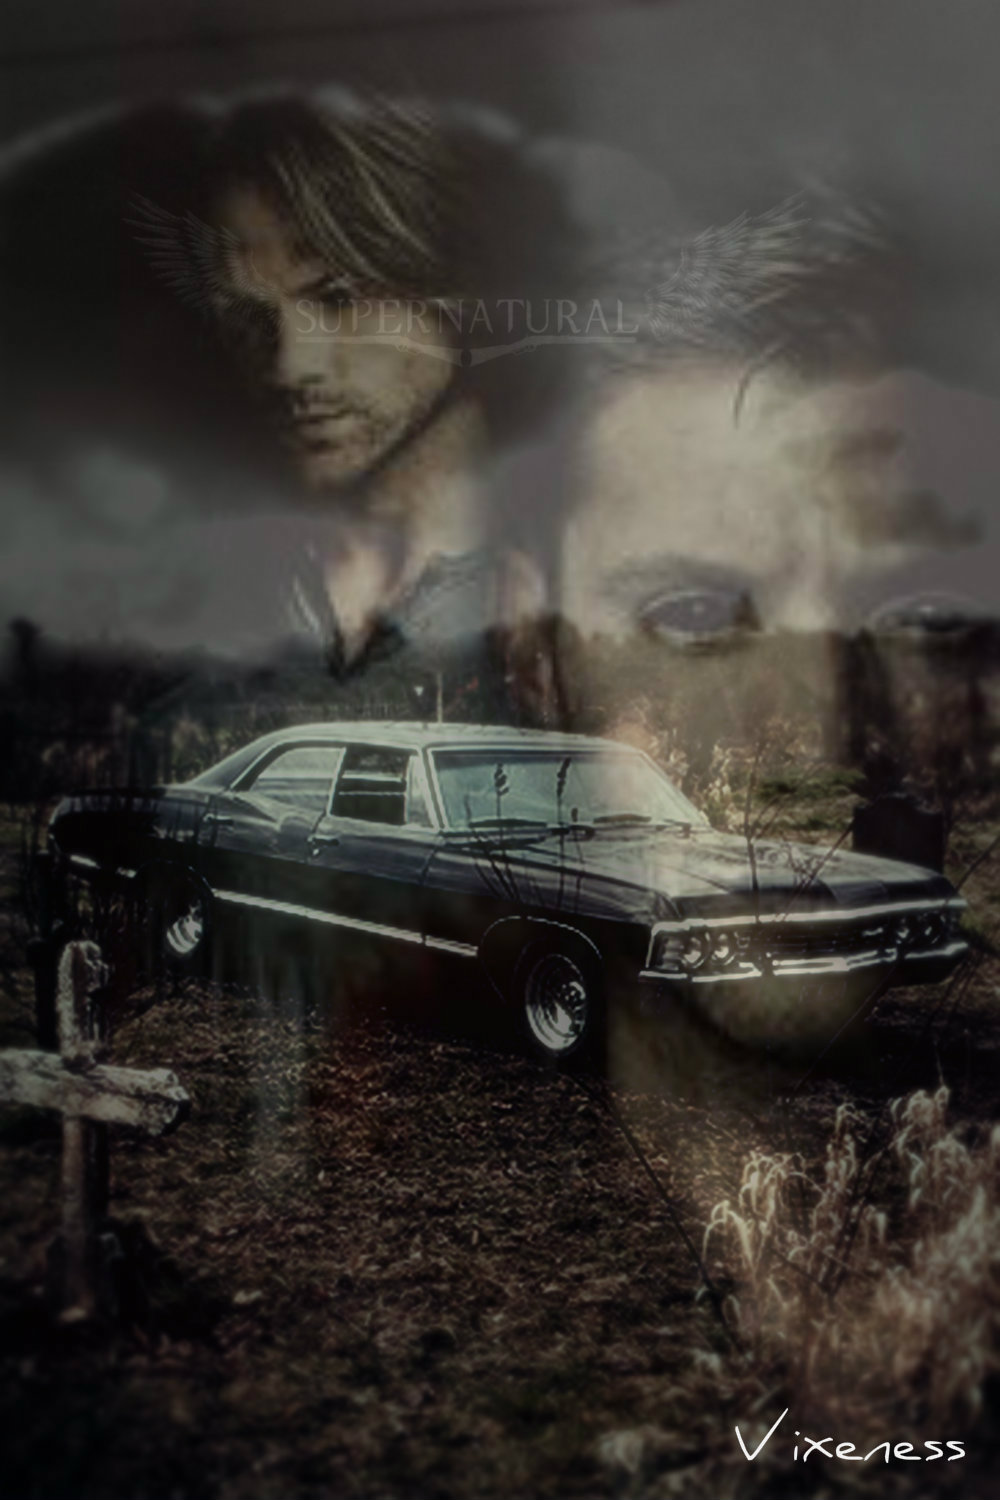 Supernatural 67 Chevy Impala Iphone Wallpaper By By Vixen1337 On Deviantart